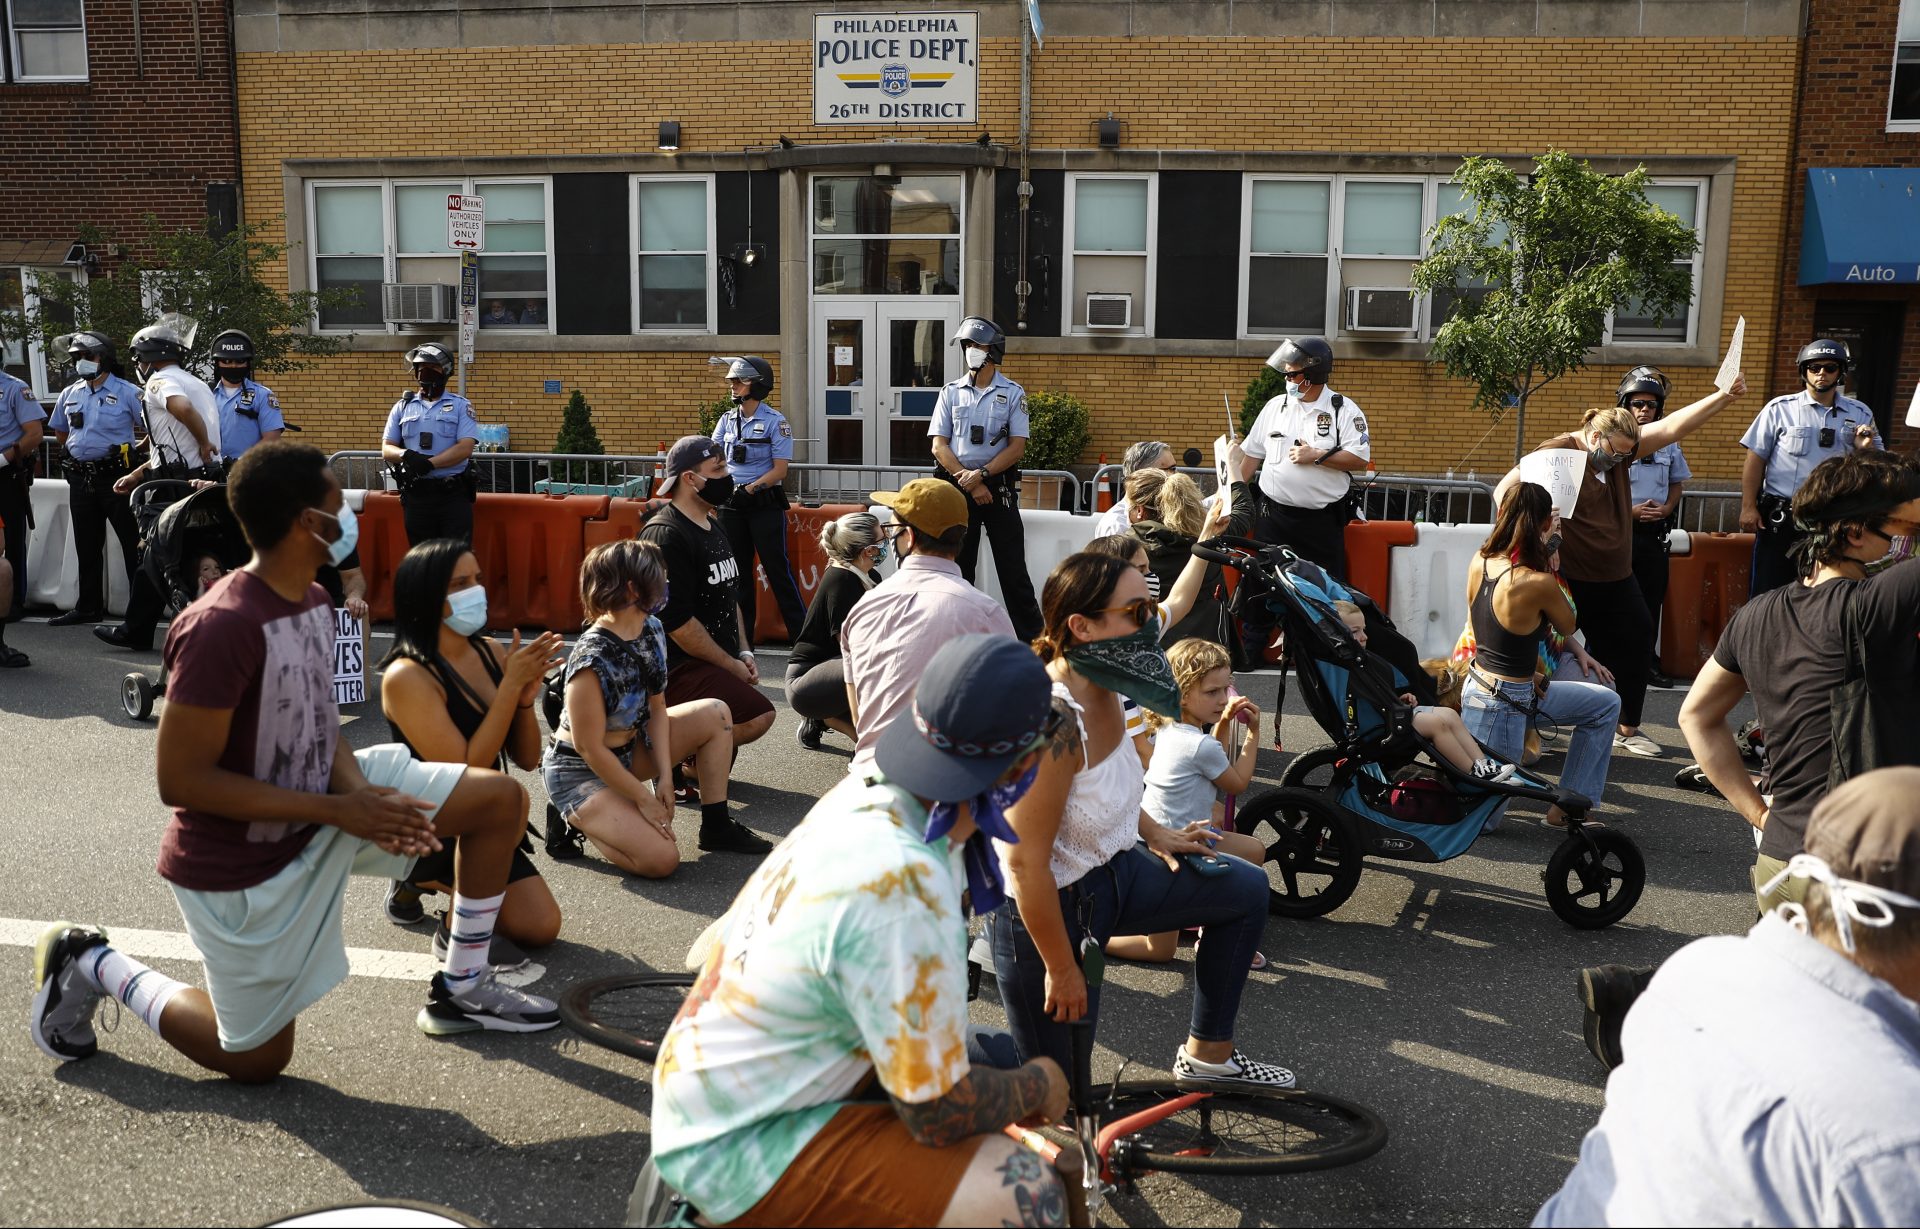 Protesters kneel Wednesday, June 3, 2020, outside the 26th District Police station in the Fishtown neighborhood of Philadelphia, demonstrating against racism and over the death of George Floyd, a black man who died after being restrained by Minneapolis police officers on May 25.